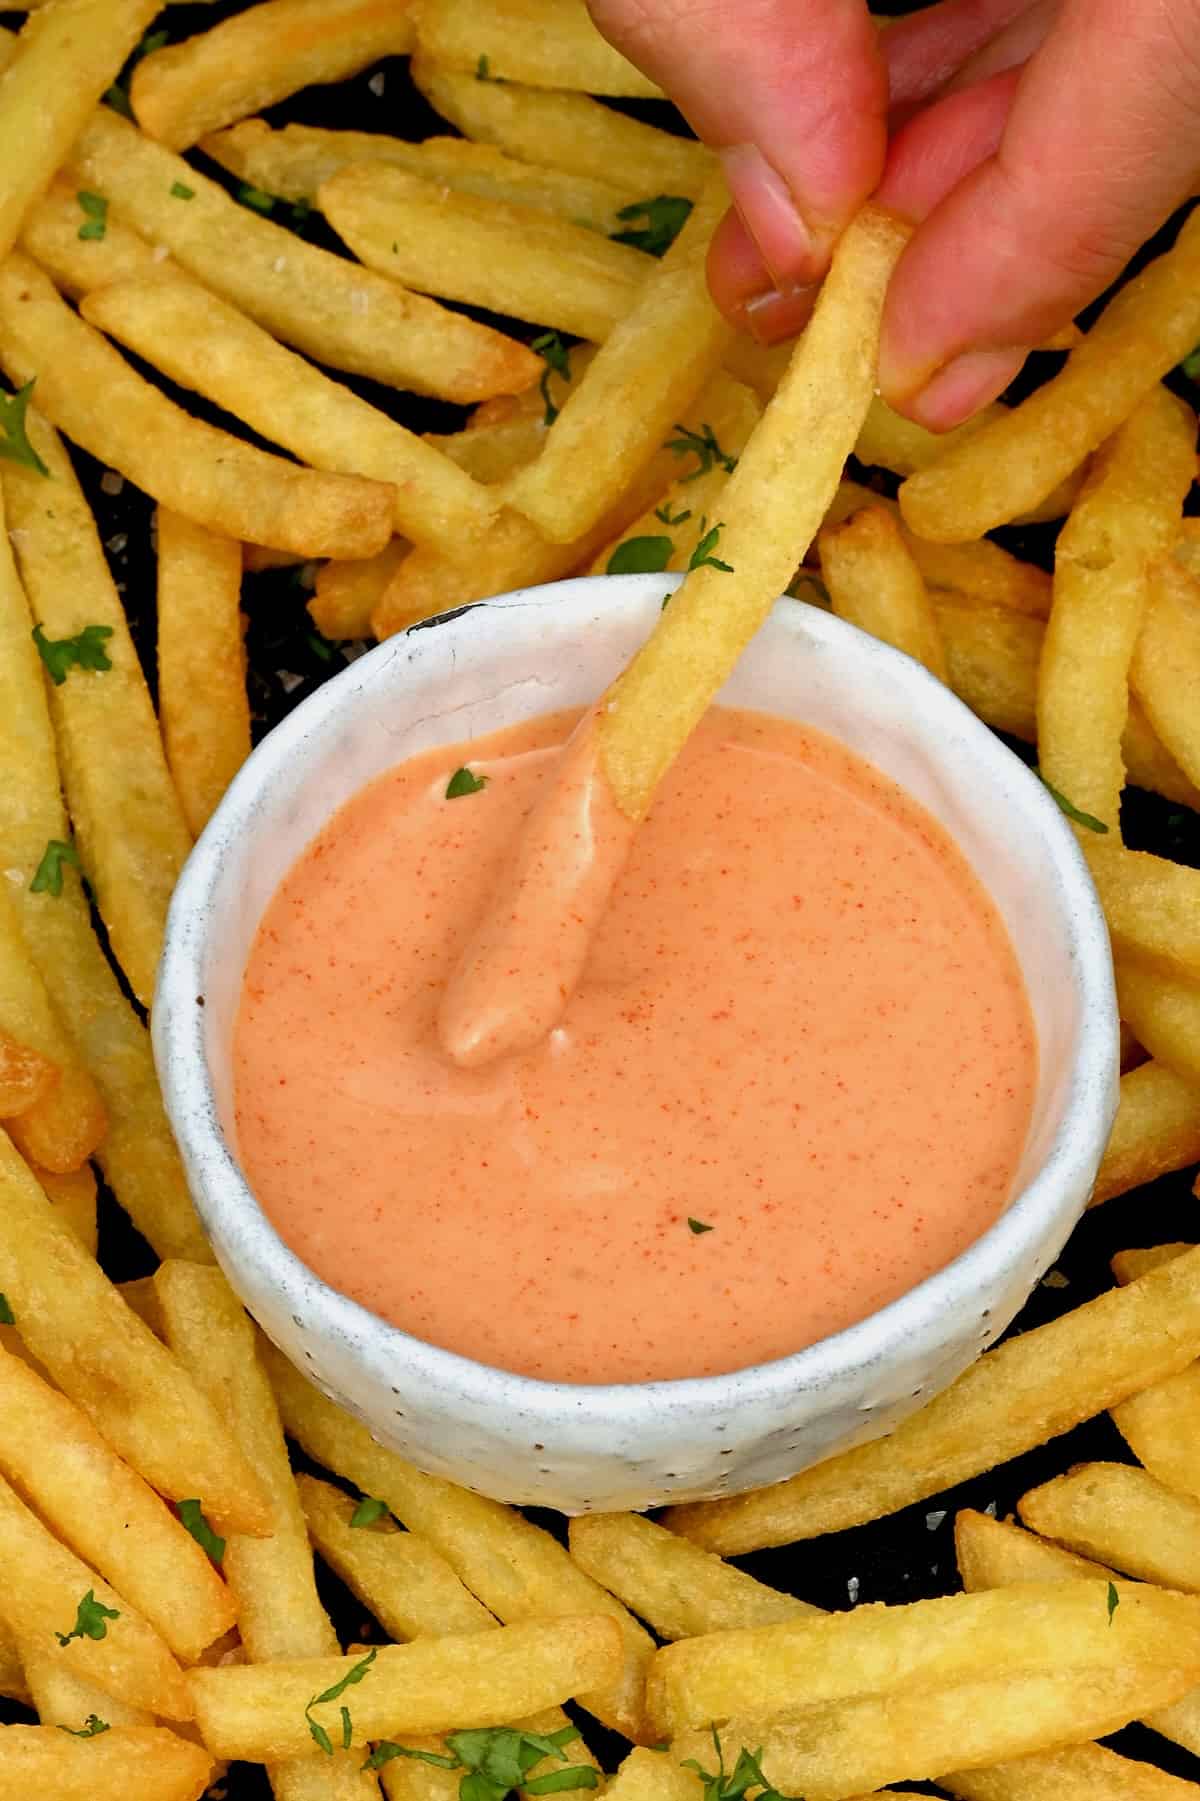 A French fry being dipped in fry sauce